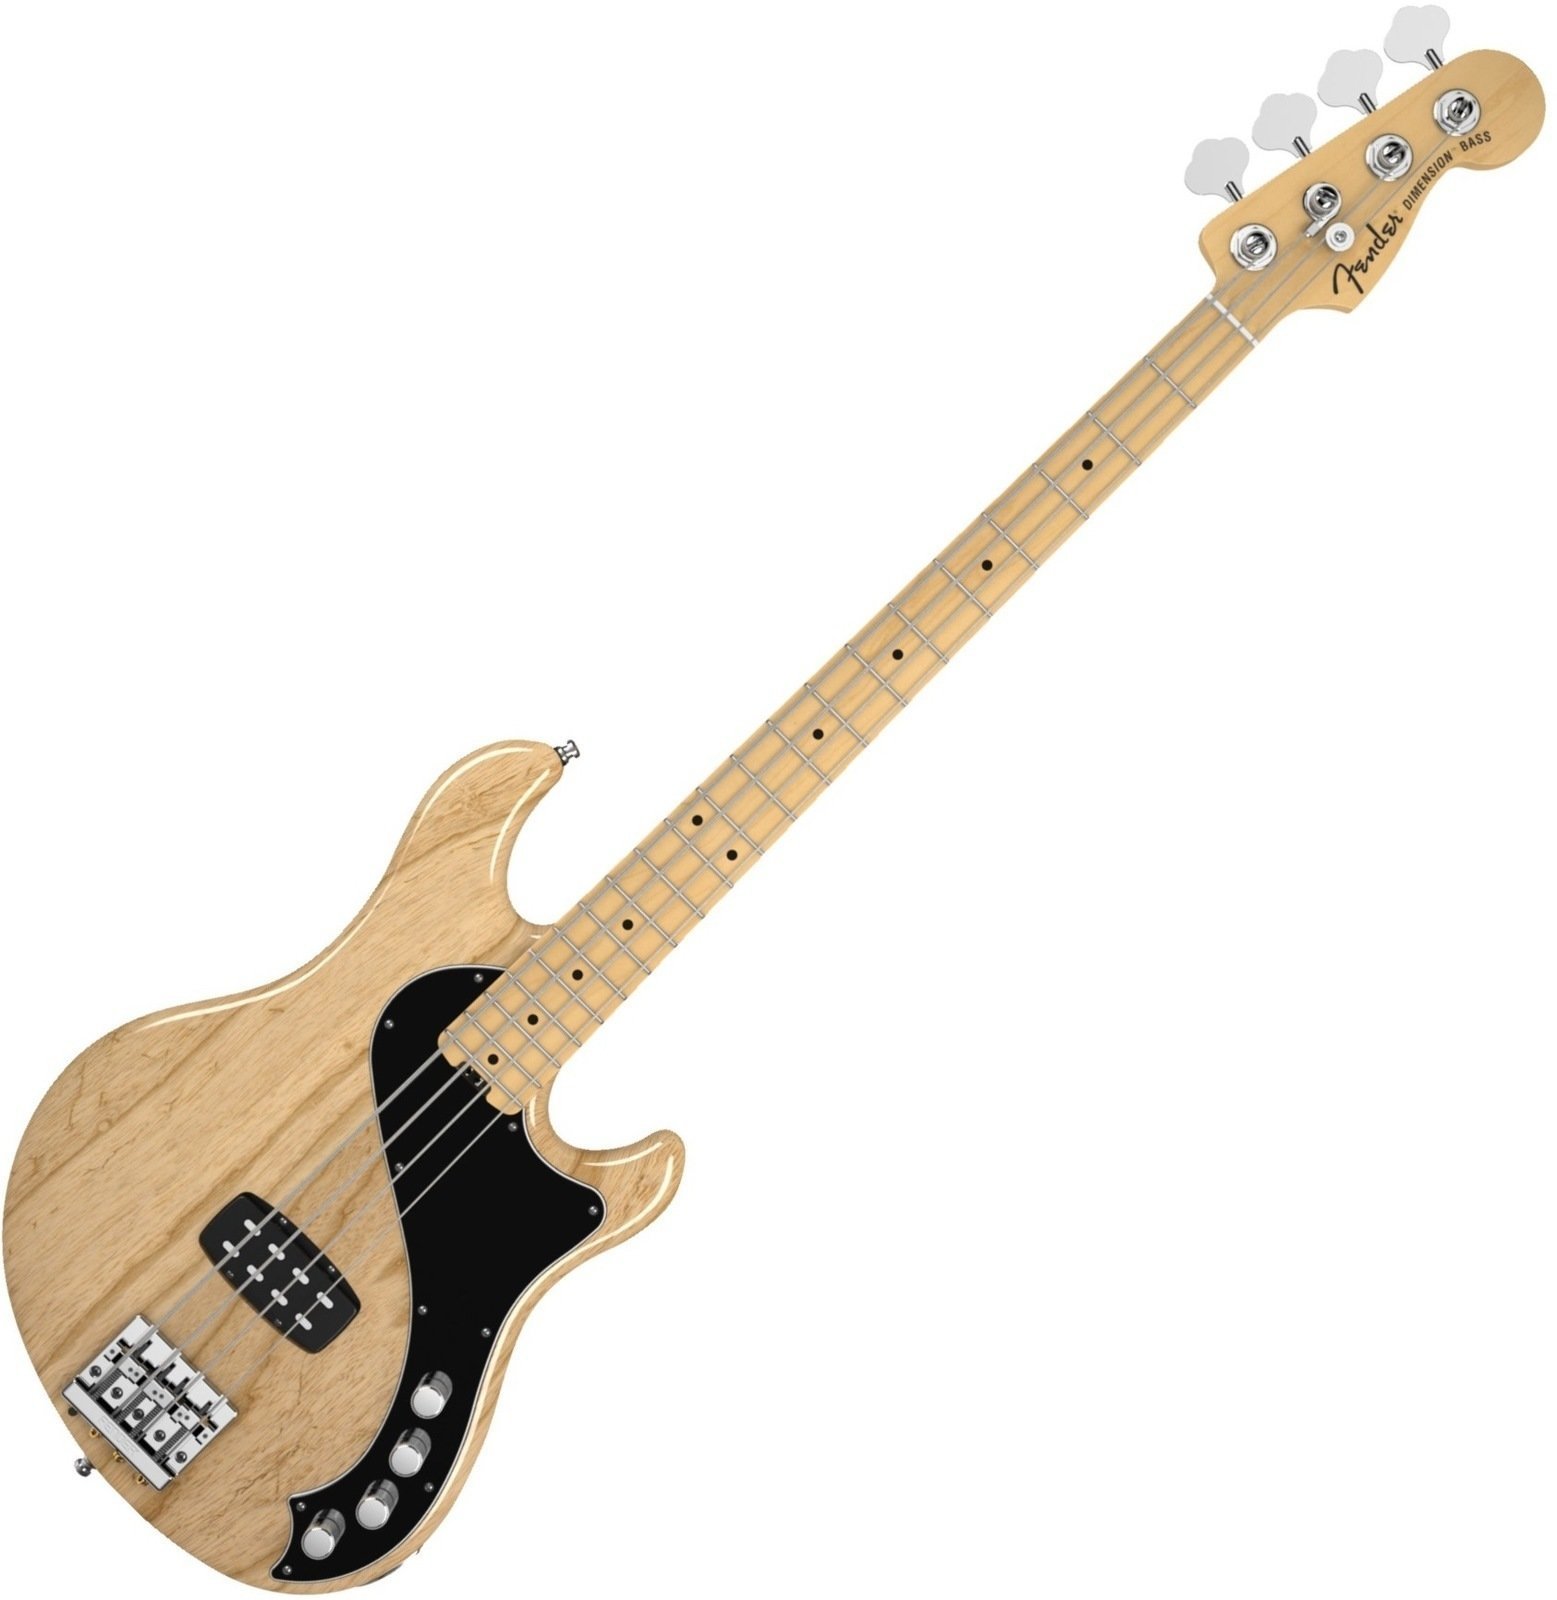 E-Bass Fender American Deluxe Dimension Bass IV, Maple Fingerboard, Natural